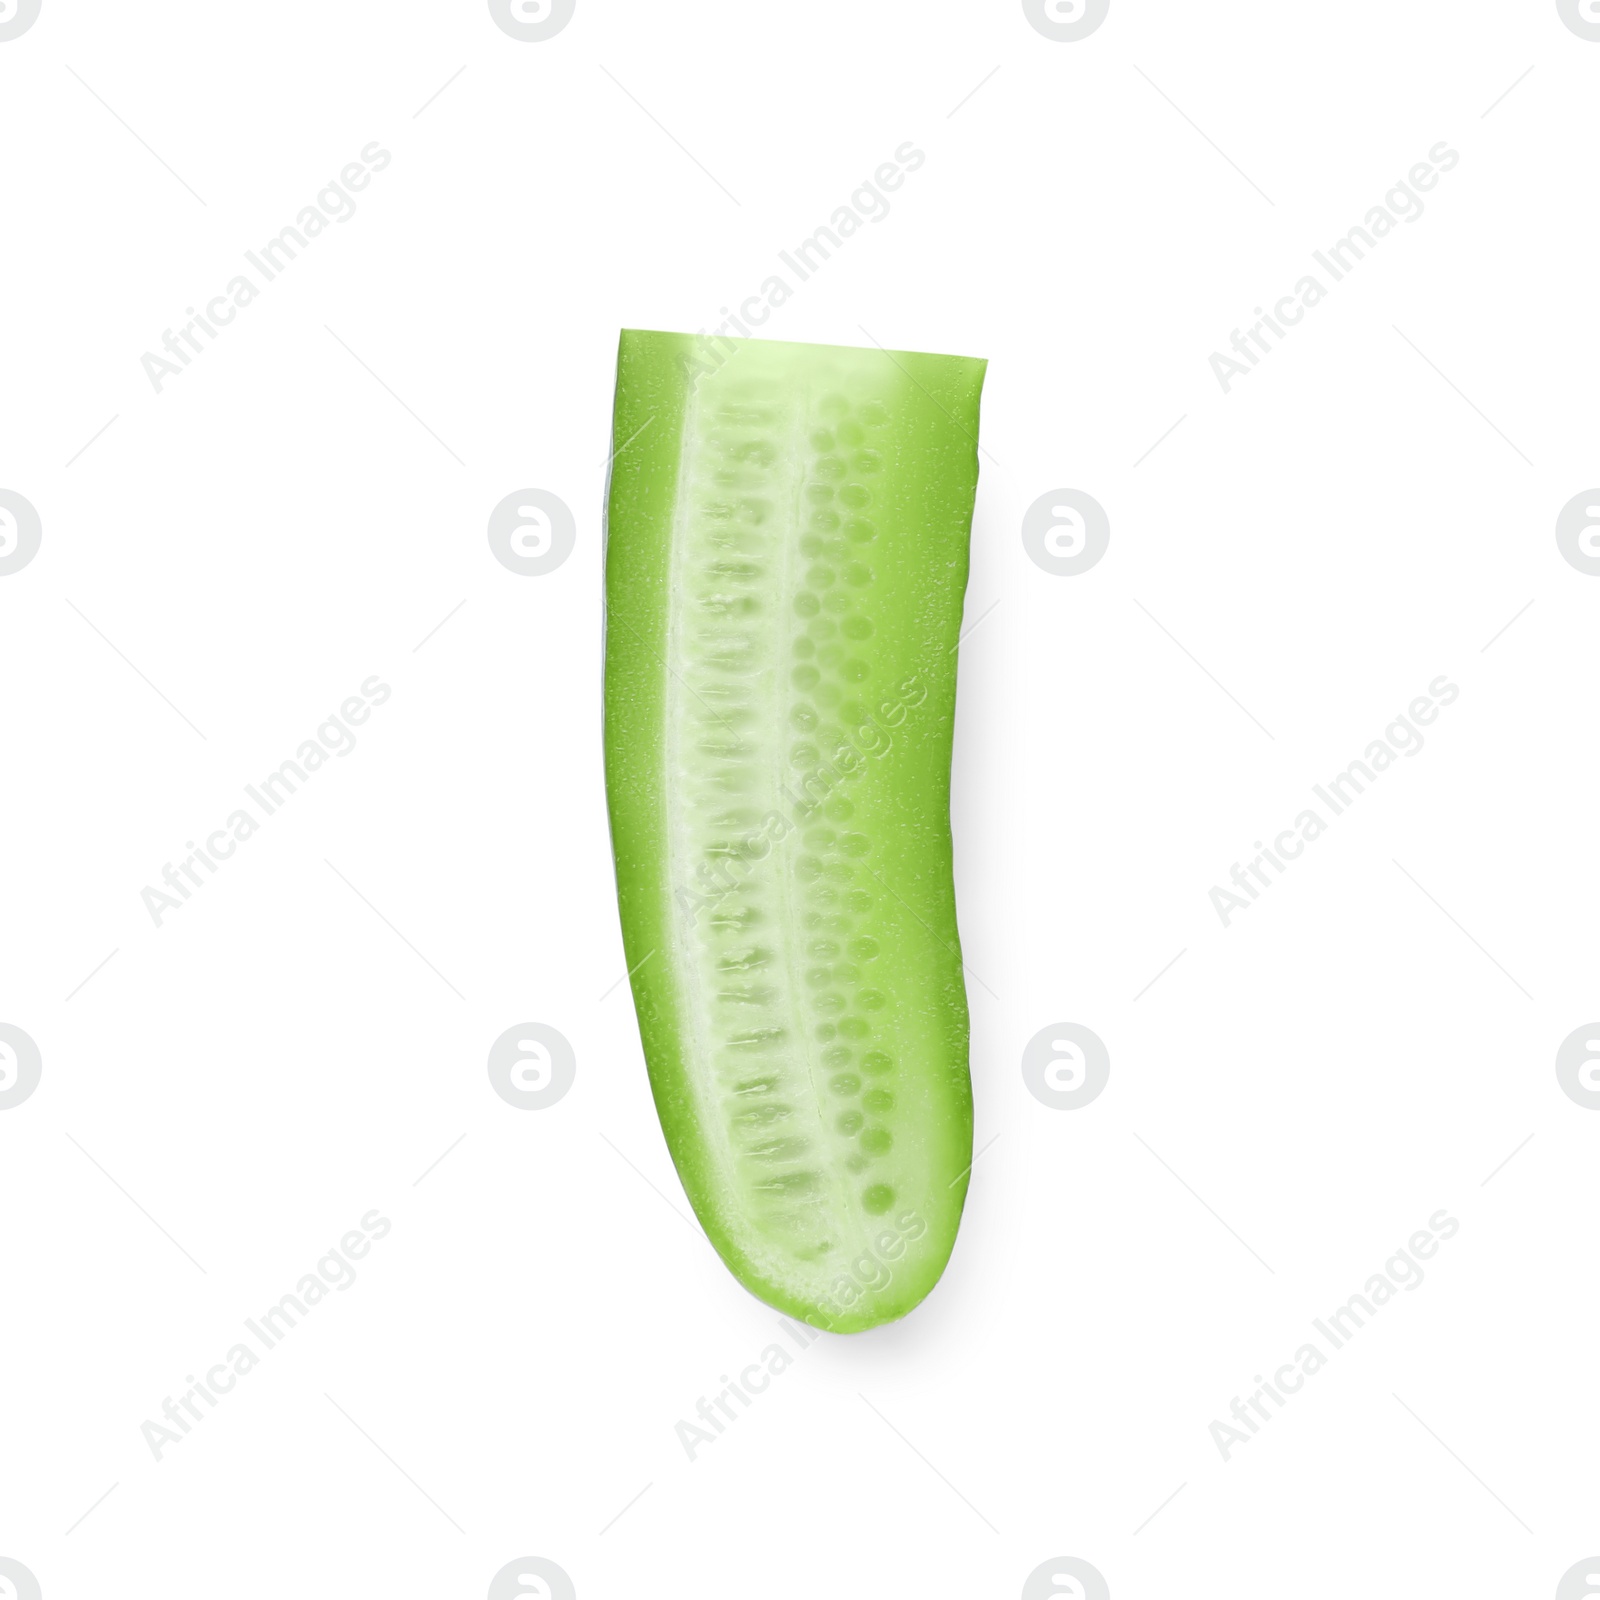 Photo of Piece of fresh green cucumber isolated on white, top view